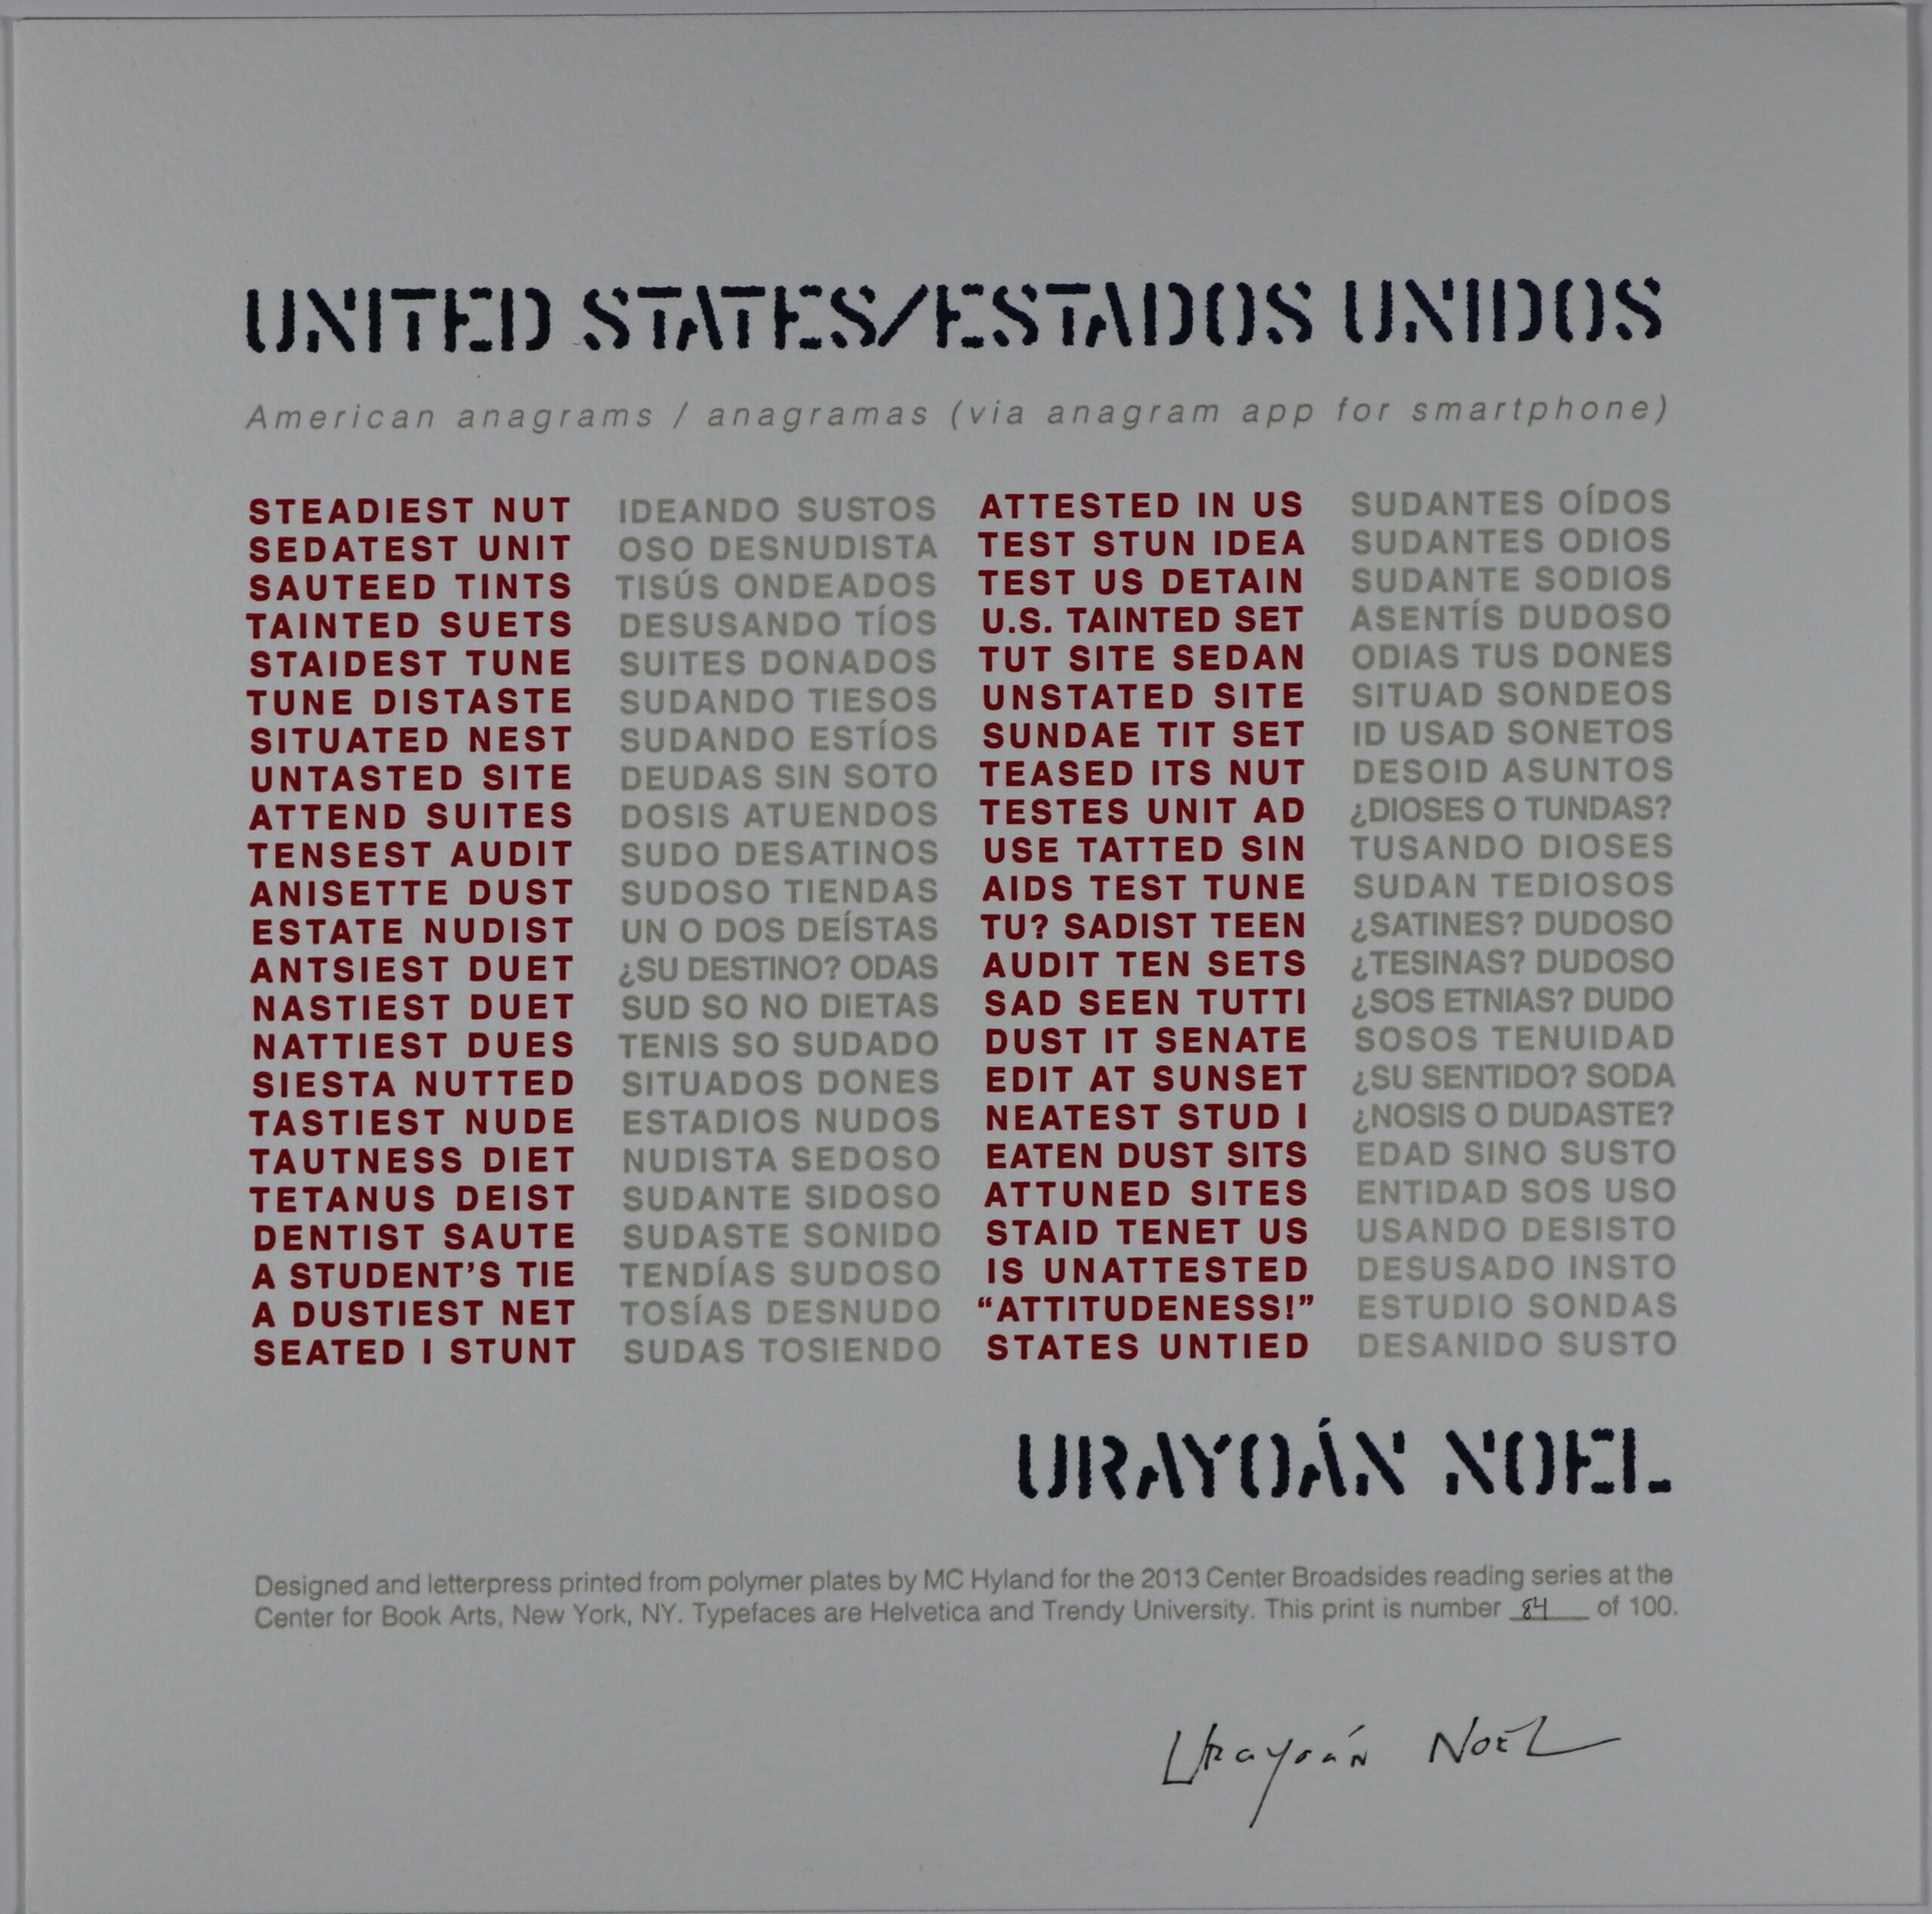 Broadside consists of a white background with the title in large, bold black letters on the top. Text and design is colored in red and gray, with a pattern of red, then following gray in long rectangular formatting. Text is centered on the broadside and takes up the majority of the size of the broadside.